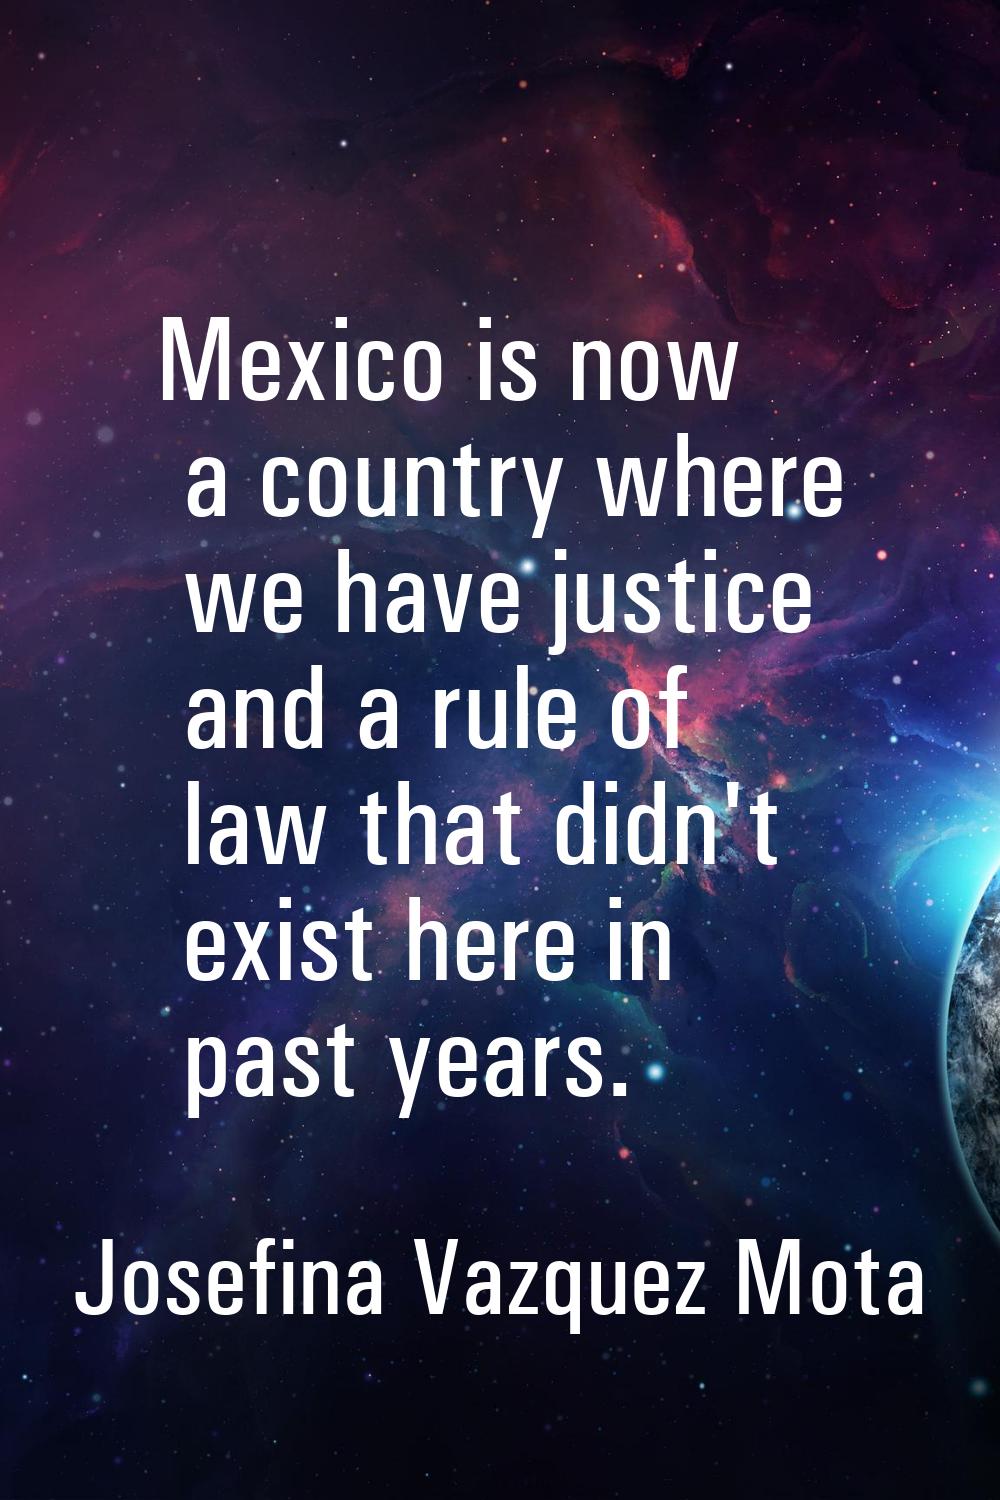 Mexico is now a country where we have justice and a rule of law that didn't exist here in past year